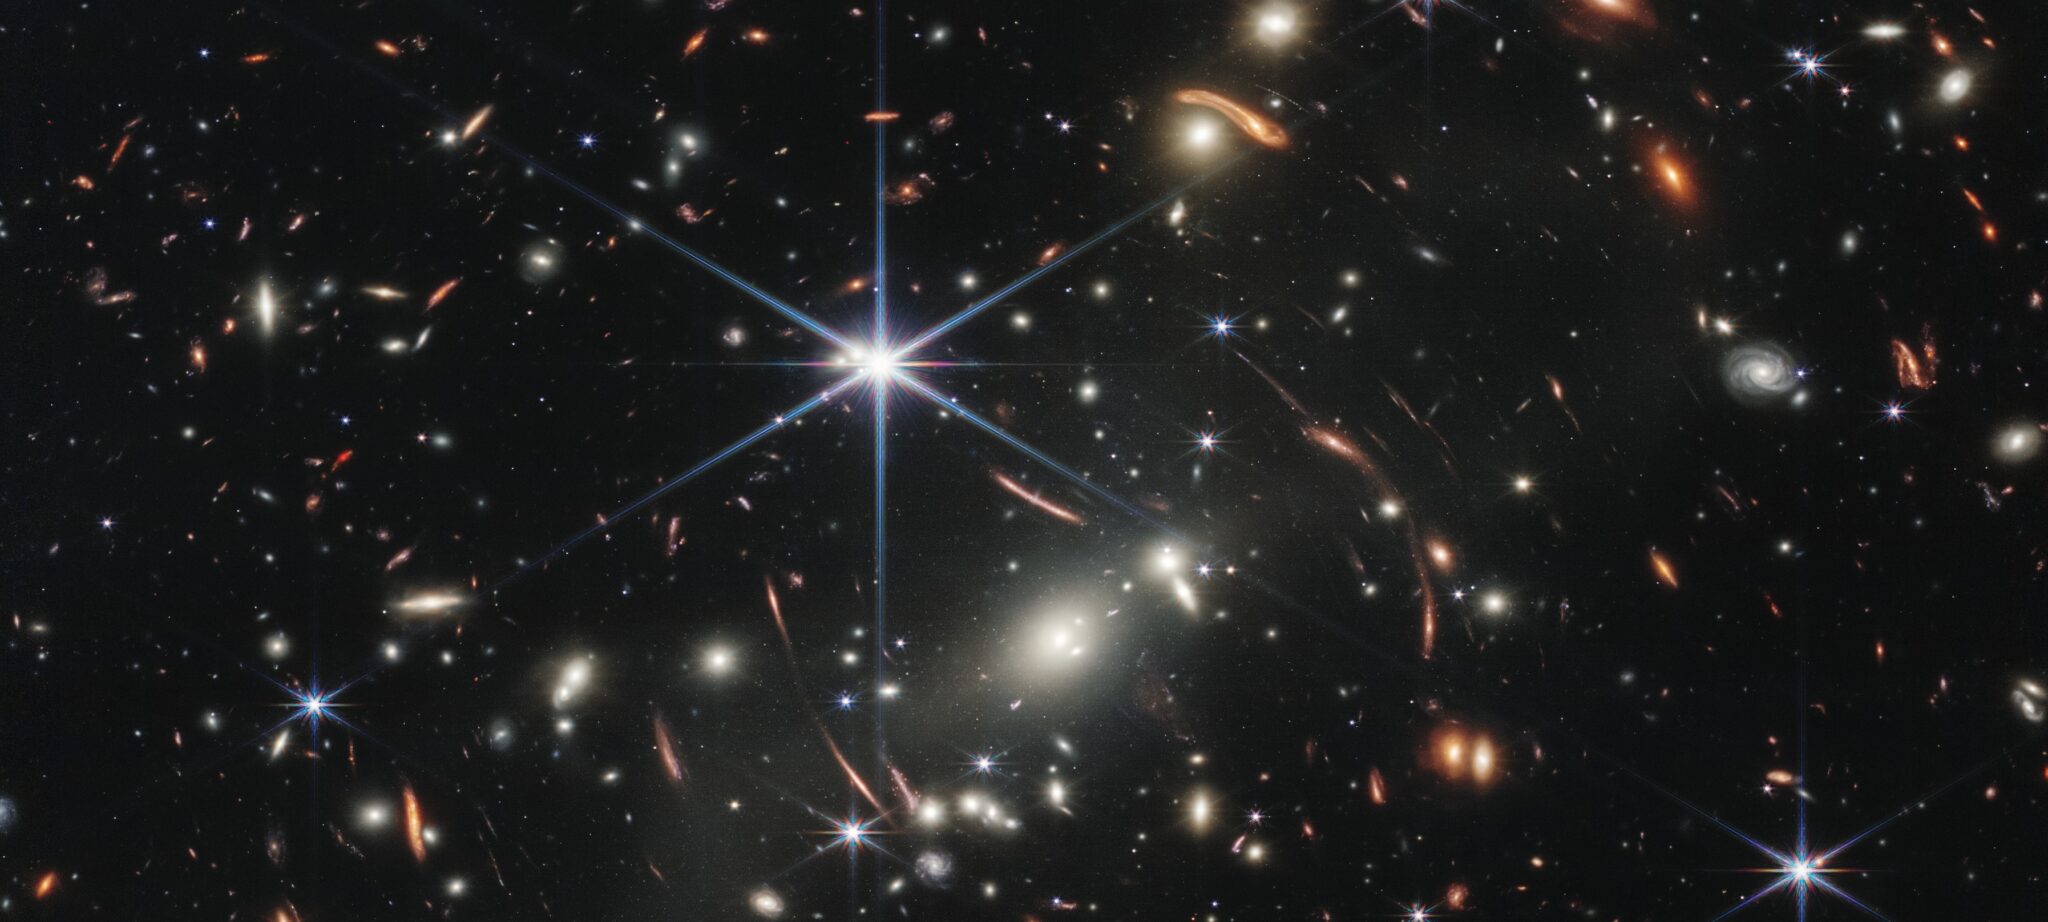 Image of stars from the Webb Space Telescope